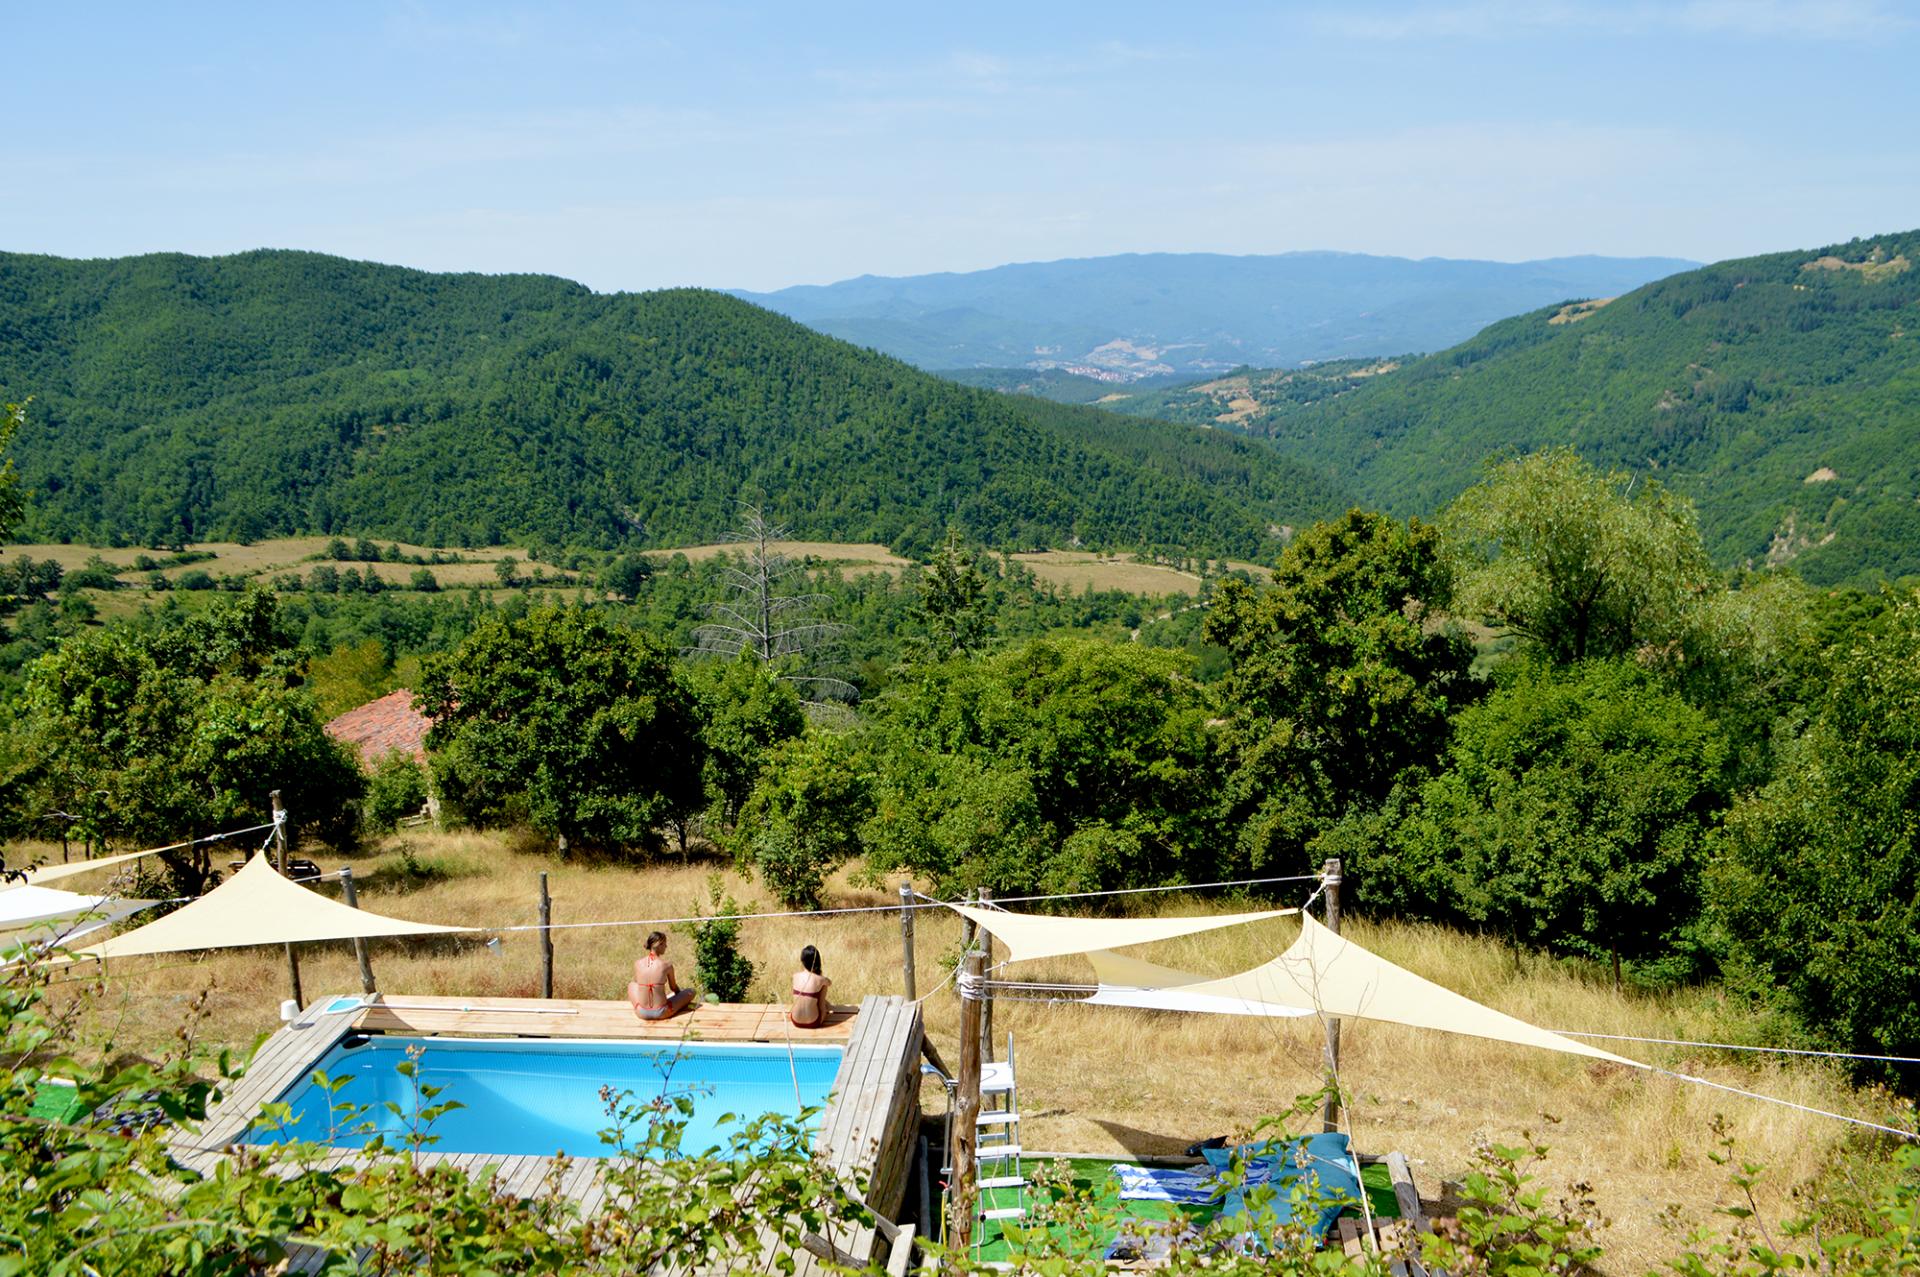 Places to stay: Novanta90 off-grid hotel, Tuscany